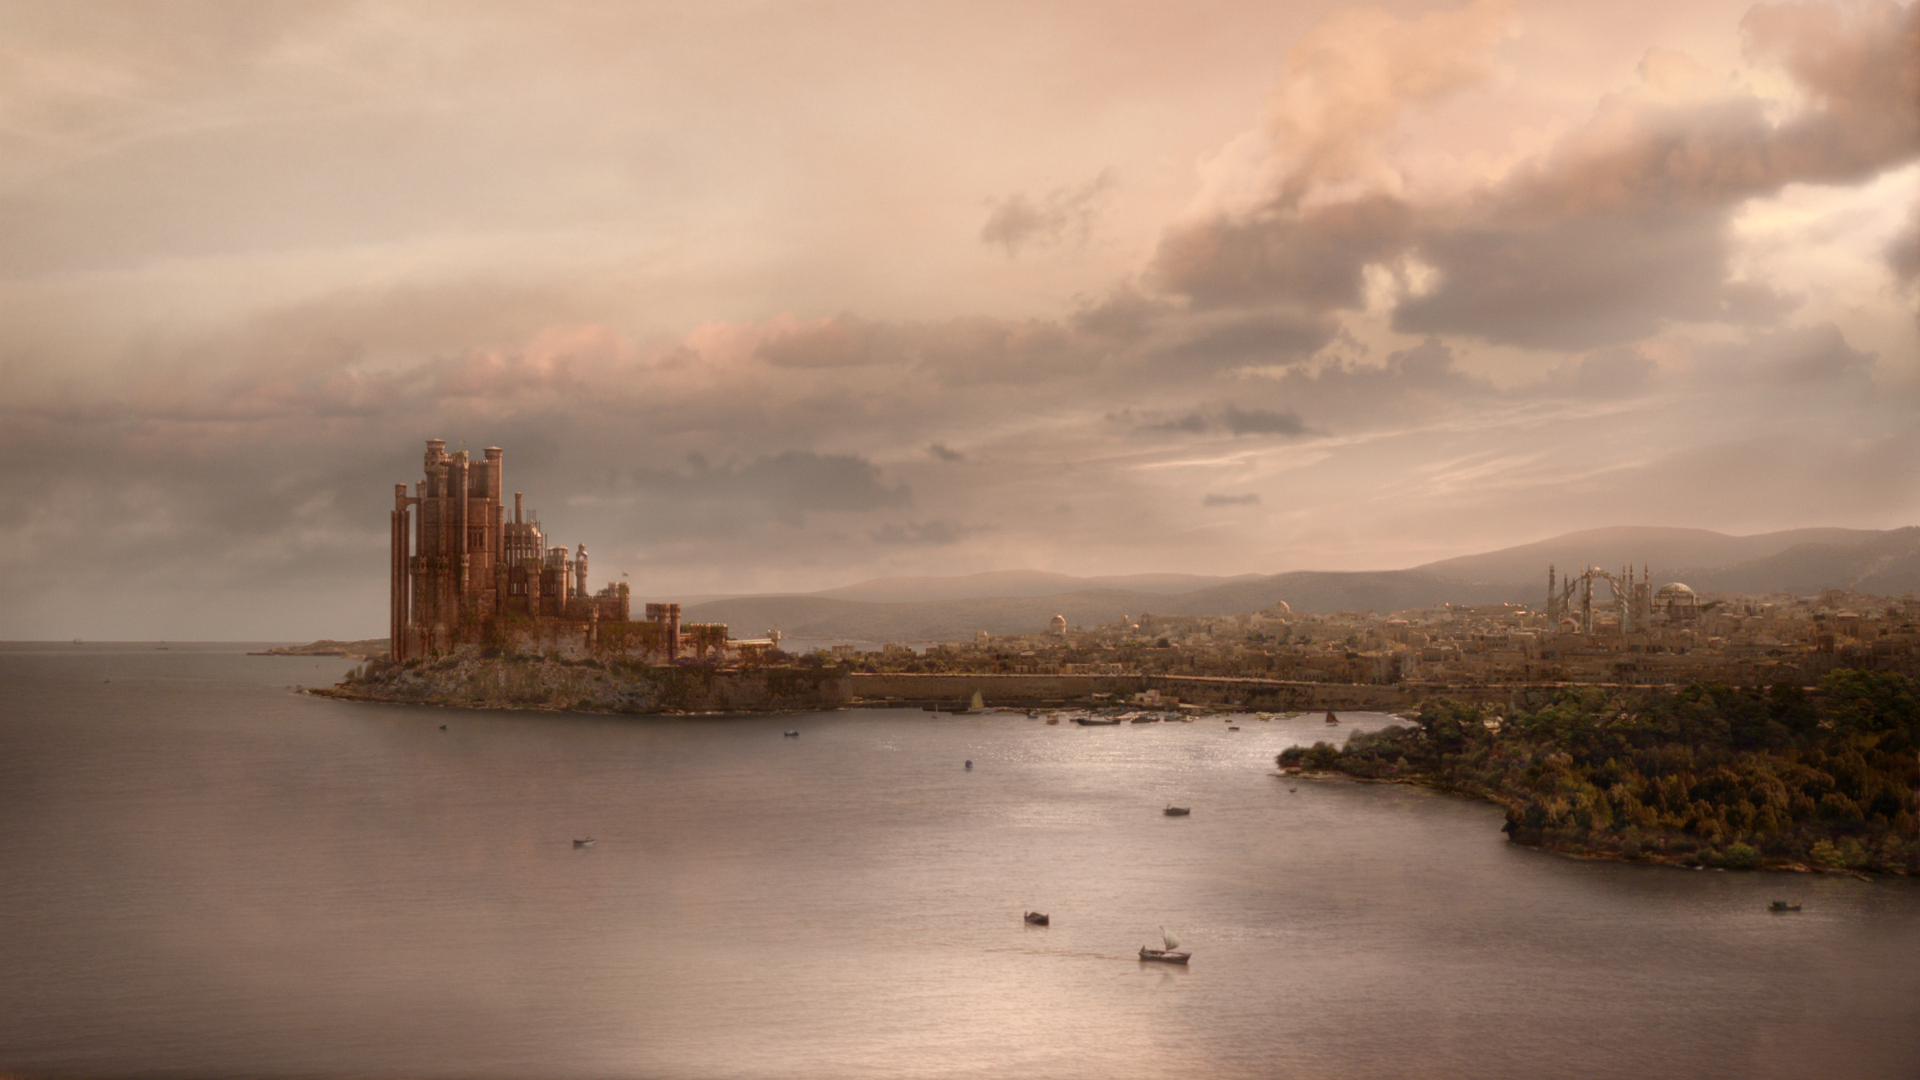 King's Landing (The Red Keep) - HBO Game of Thrones